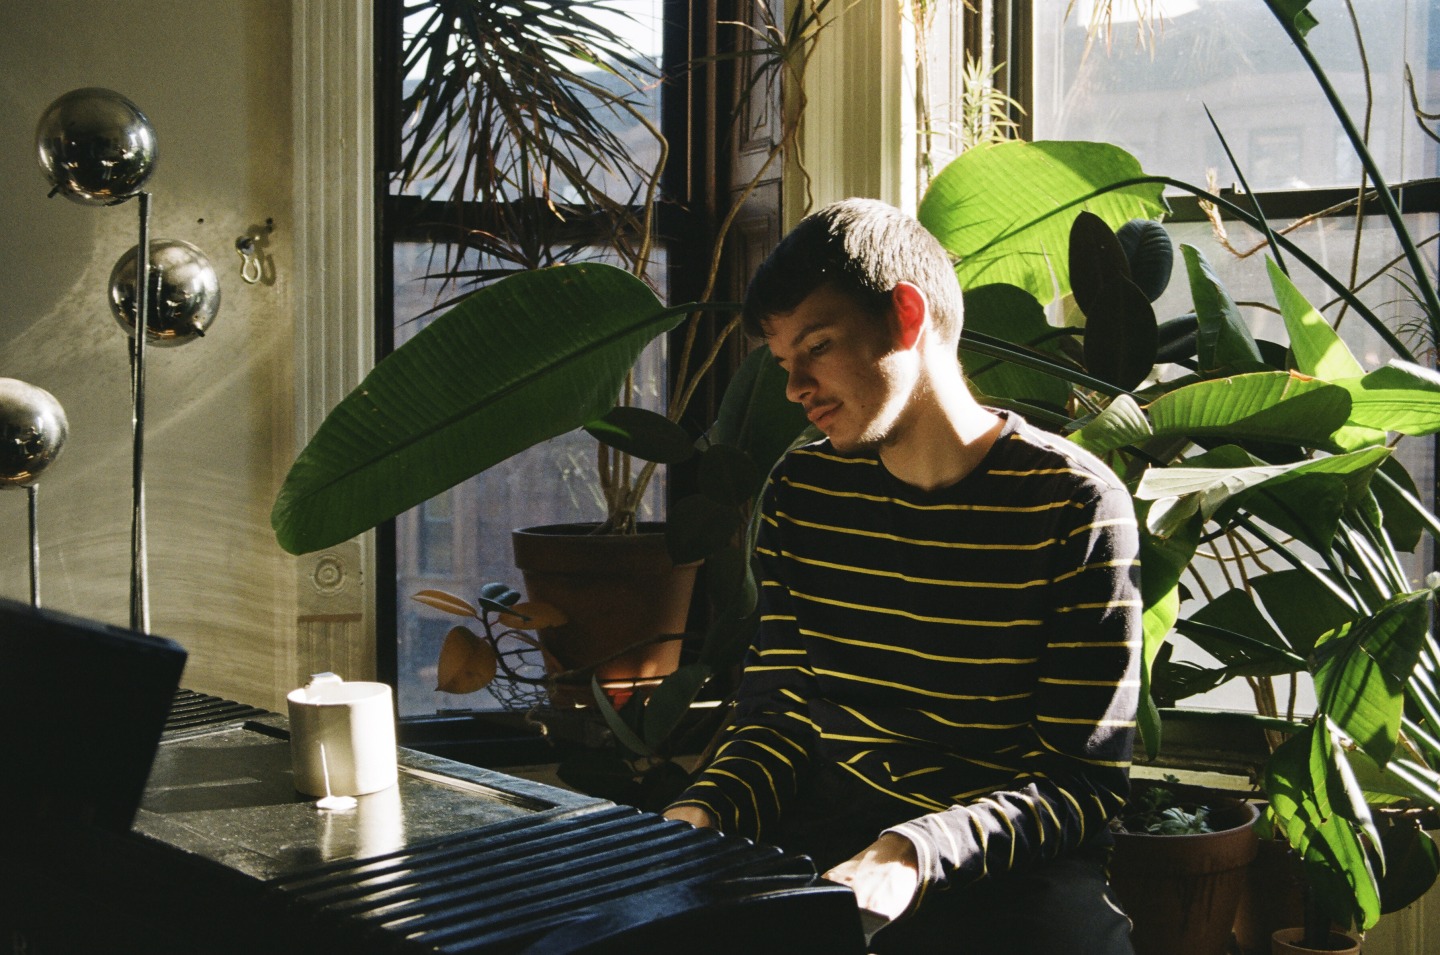 Fall in love with Rex Orange County in this new FADER documentary